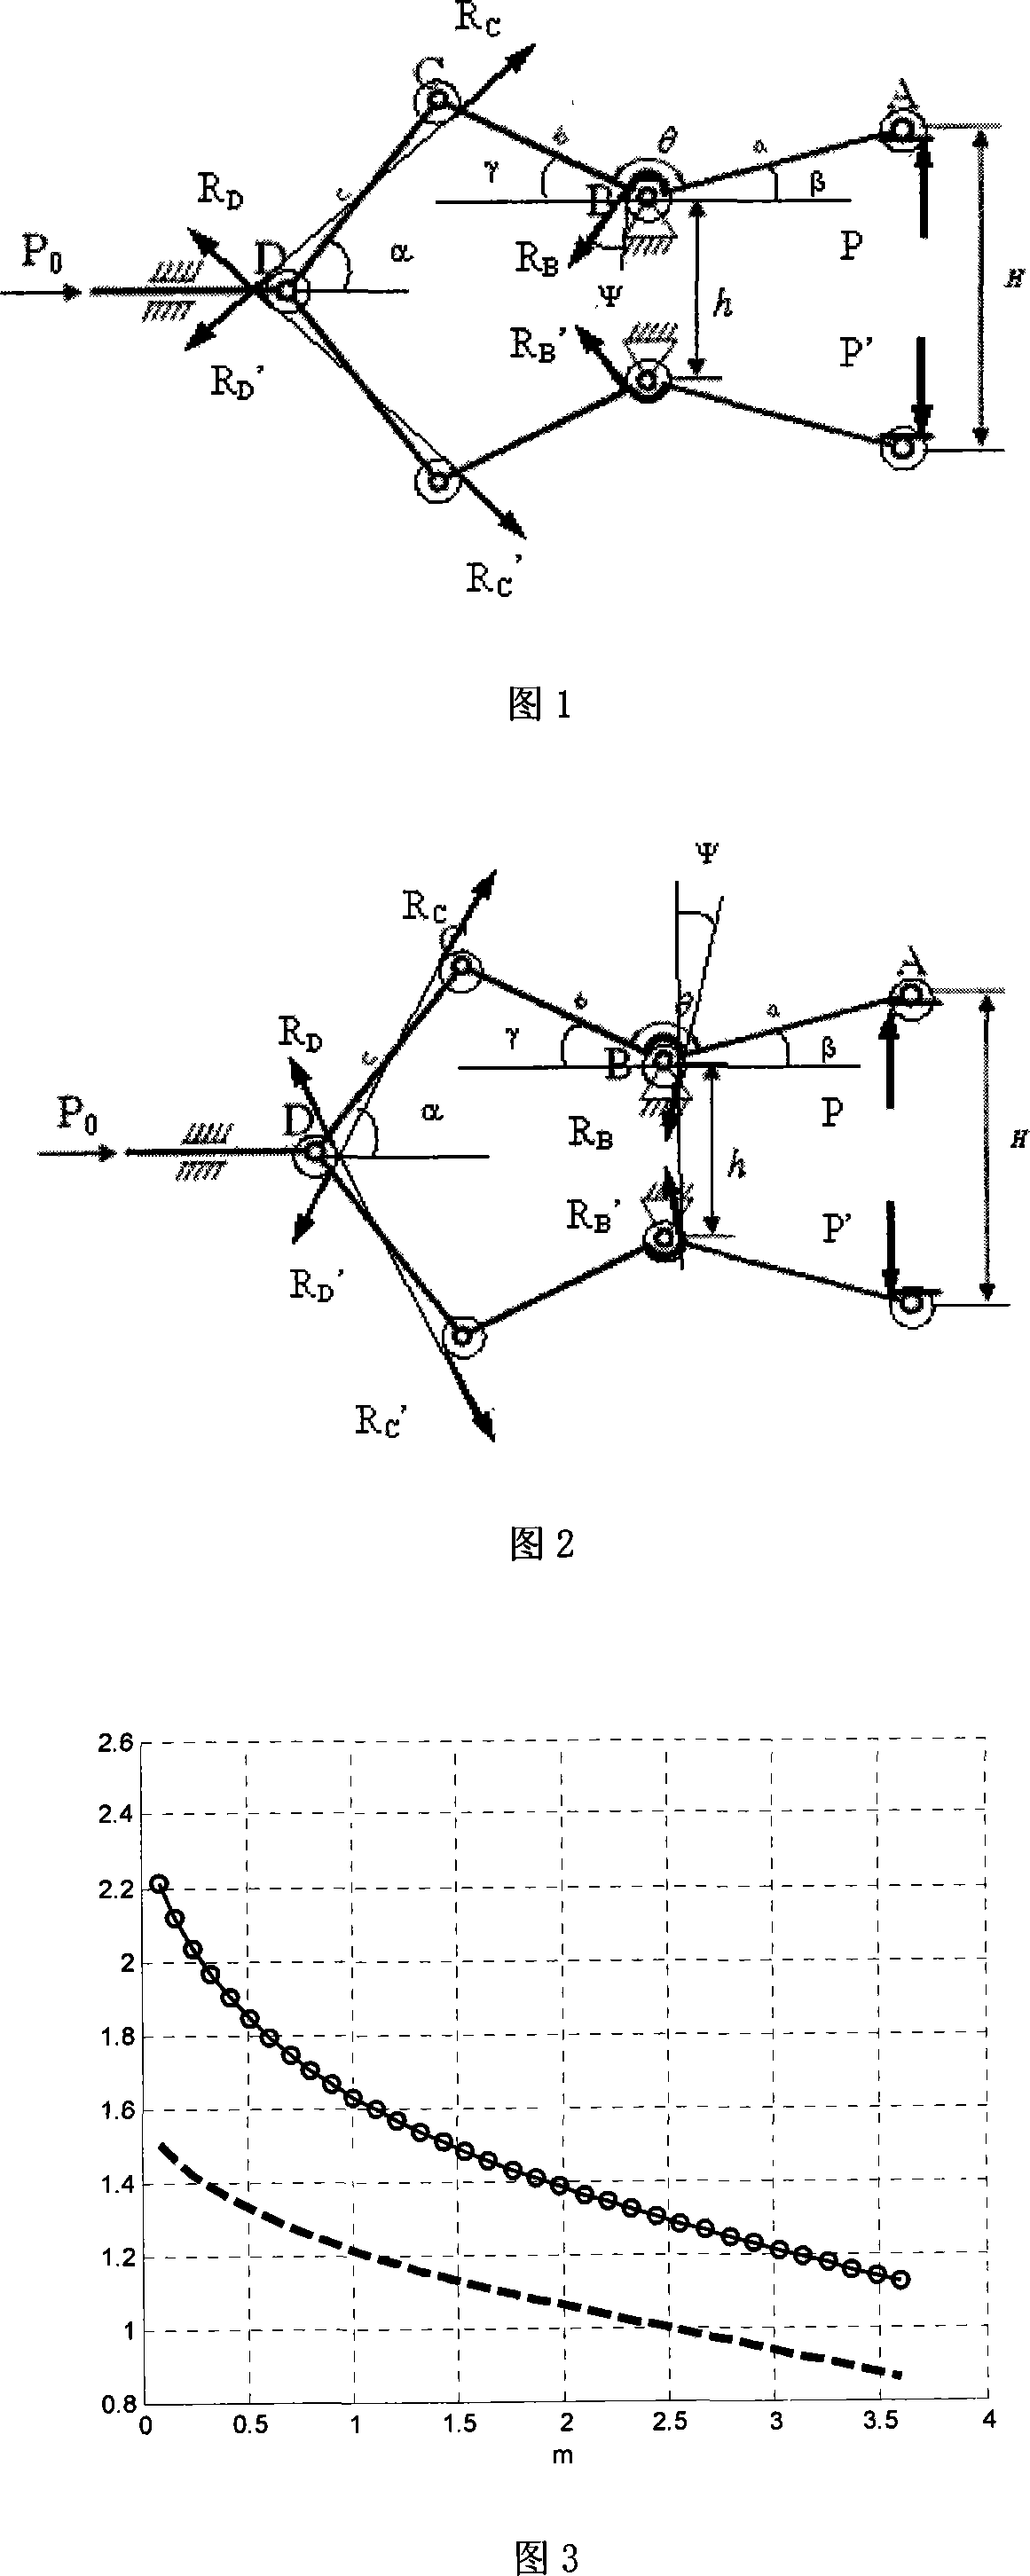 High-stability heavy-load clamp